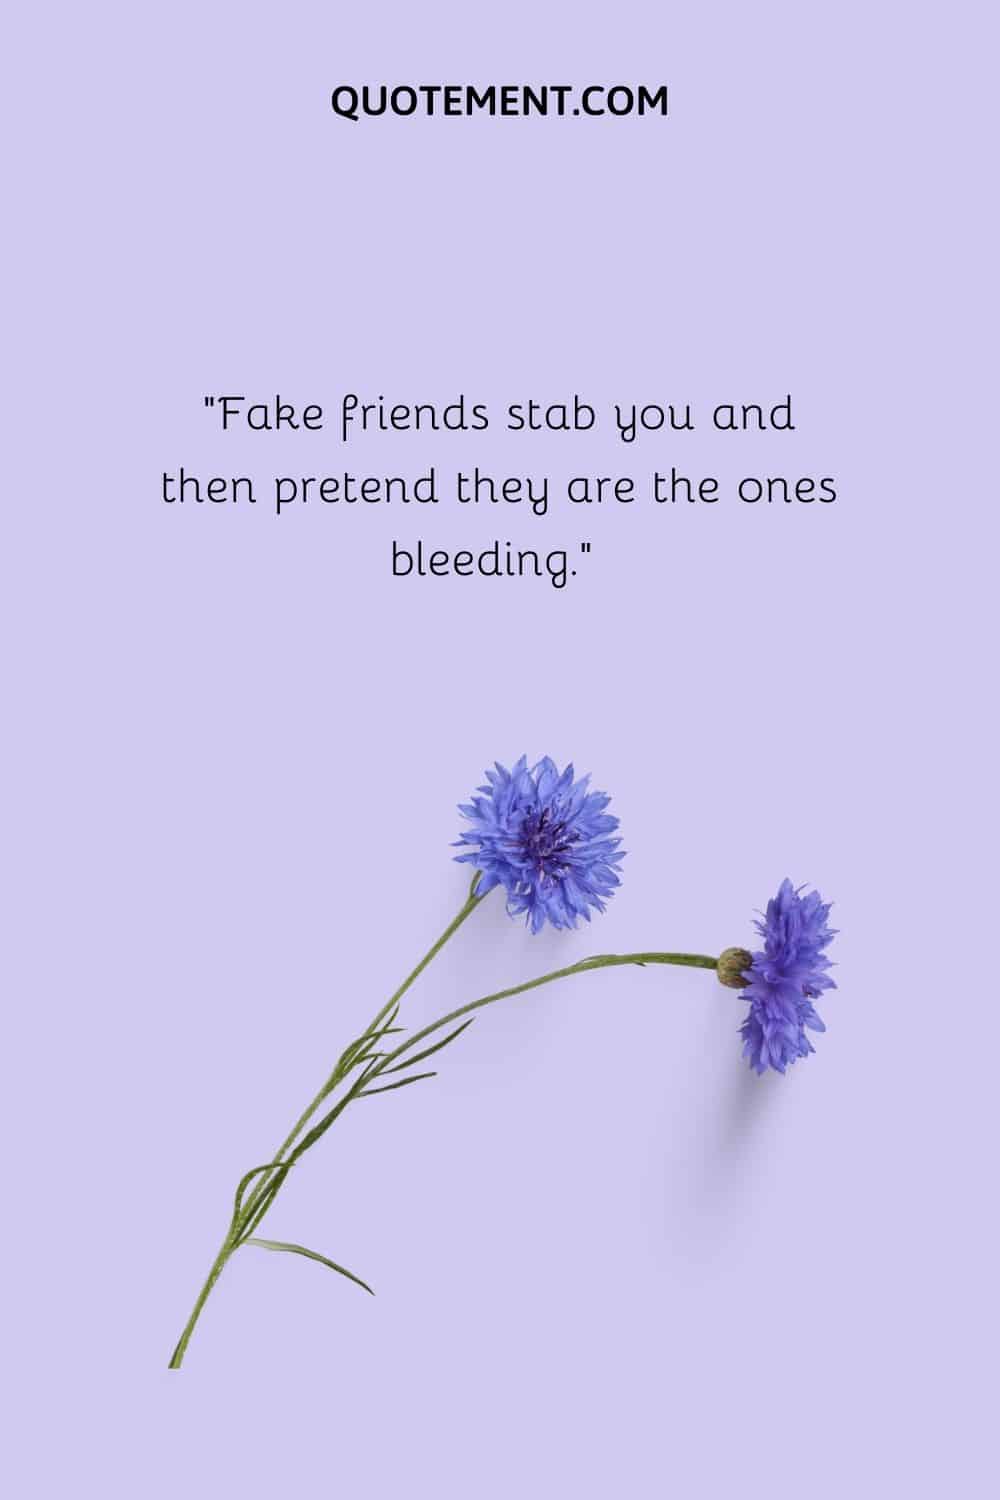 Fake friends stab you and then pretend they are the ones bleeding